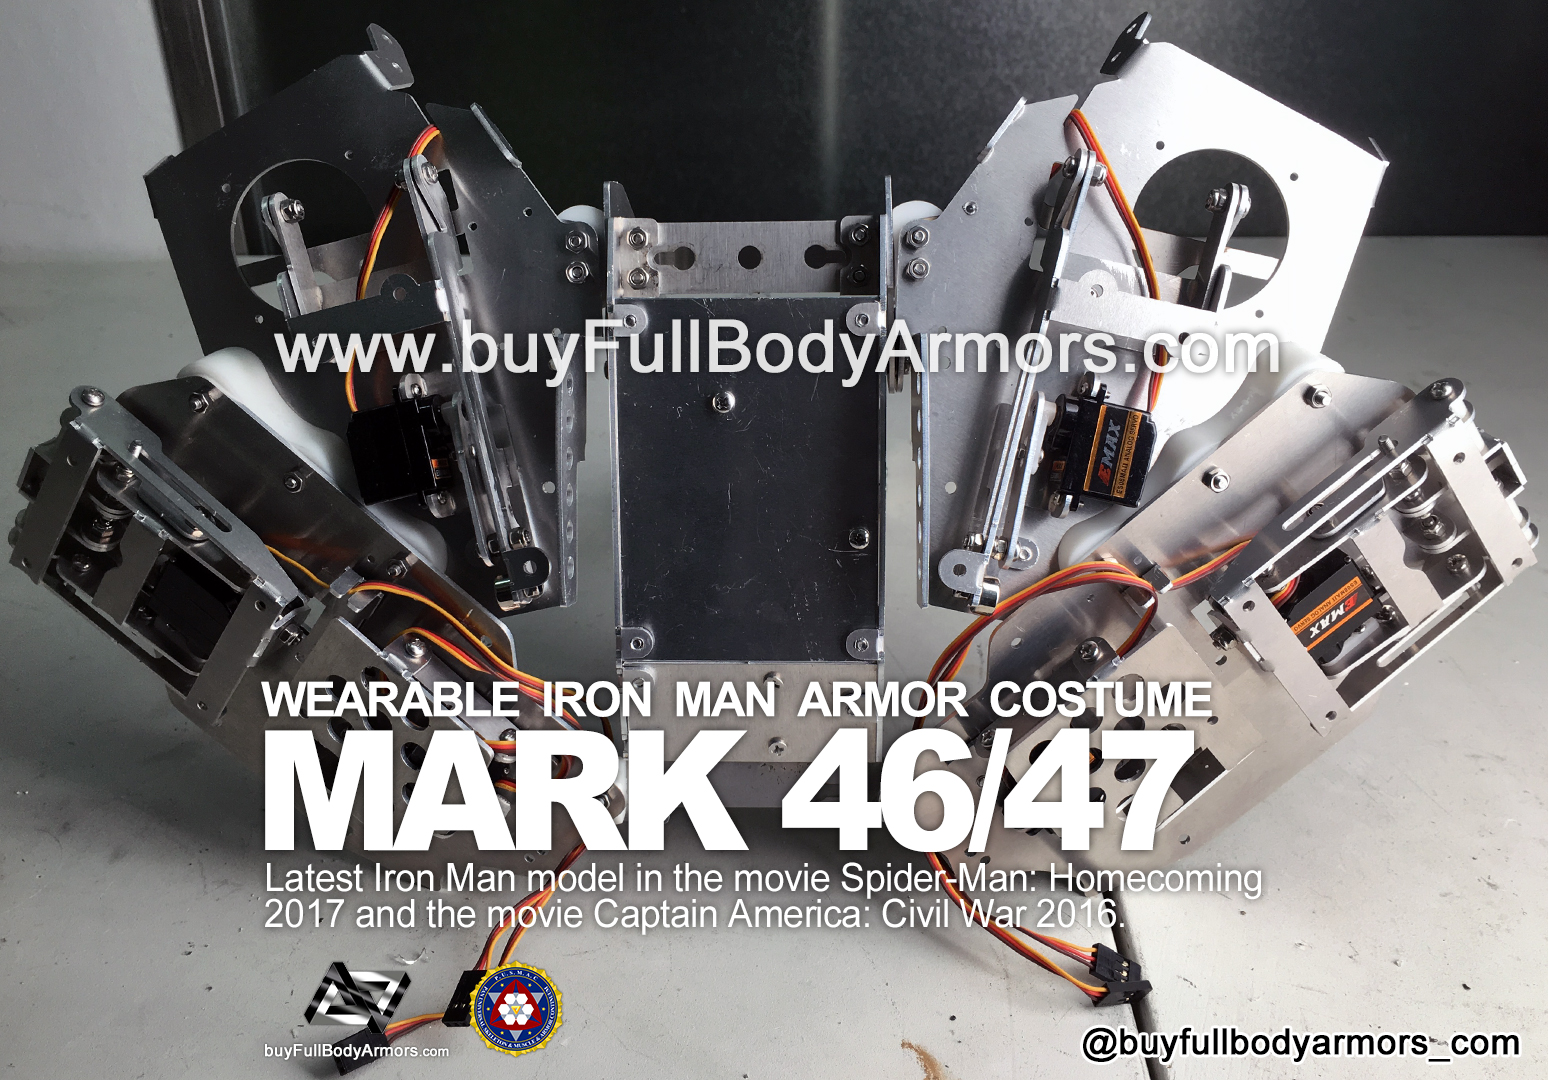 The Motorized Open-Close Mechanical Structure of the Back Armor - the Wearable Iron Man Mark 47 / 46 Armor Costume Suit prototype 1